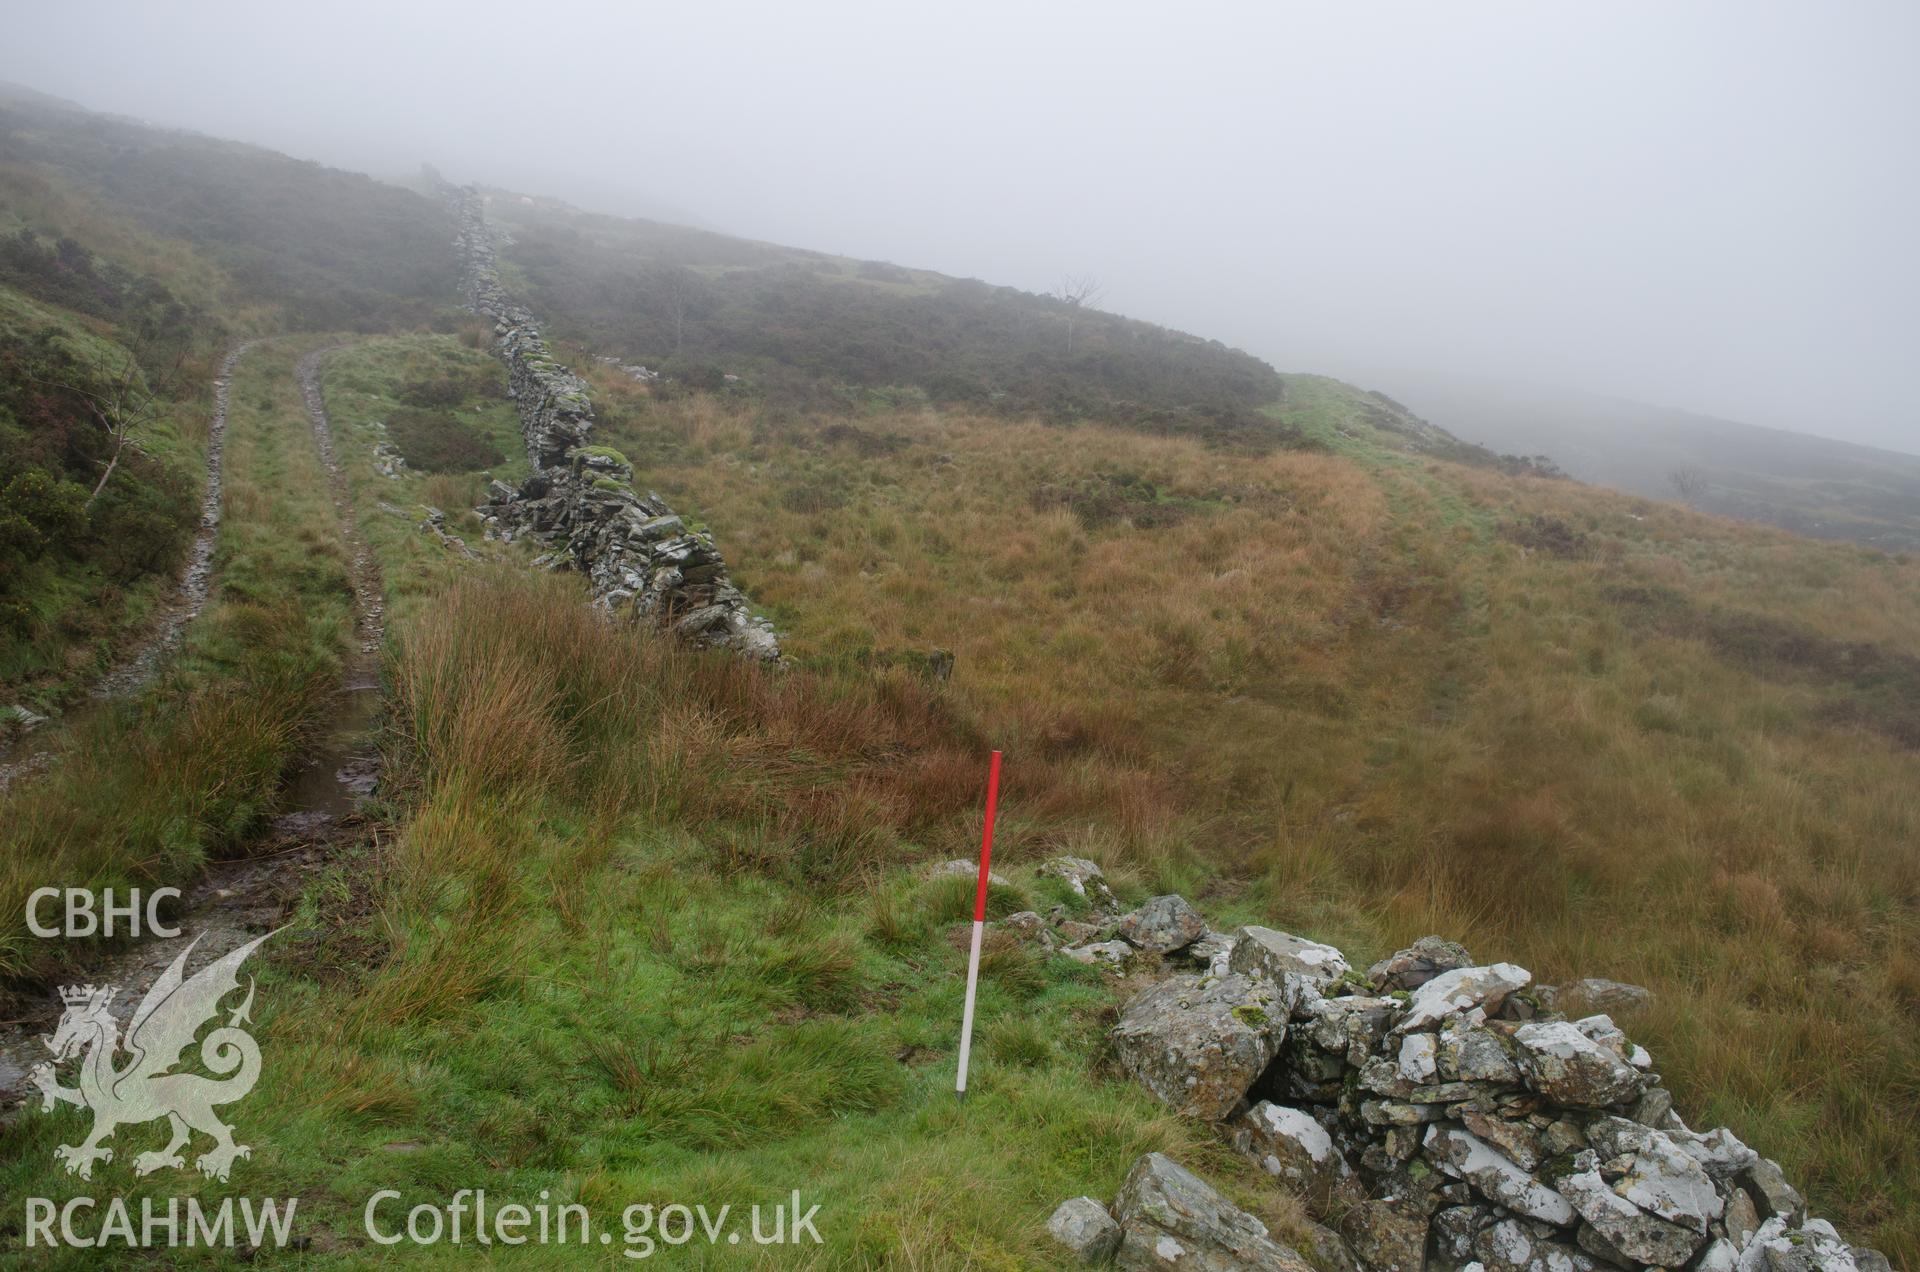 View from the north of north-south drystone wall at Llyn Gelli-Gain, Trawsfynydd. Photographed as part of archaeological assessment conducted by Gwynedd Archaeological Trust on 16th October 2018. Project no. 2579.